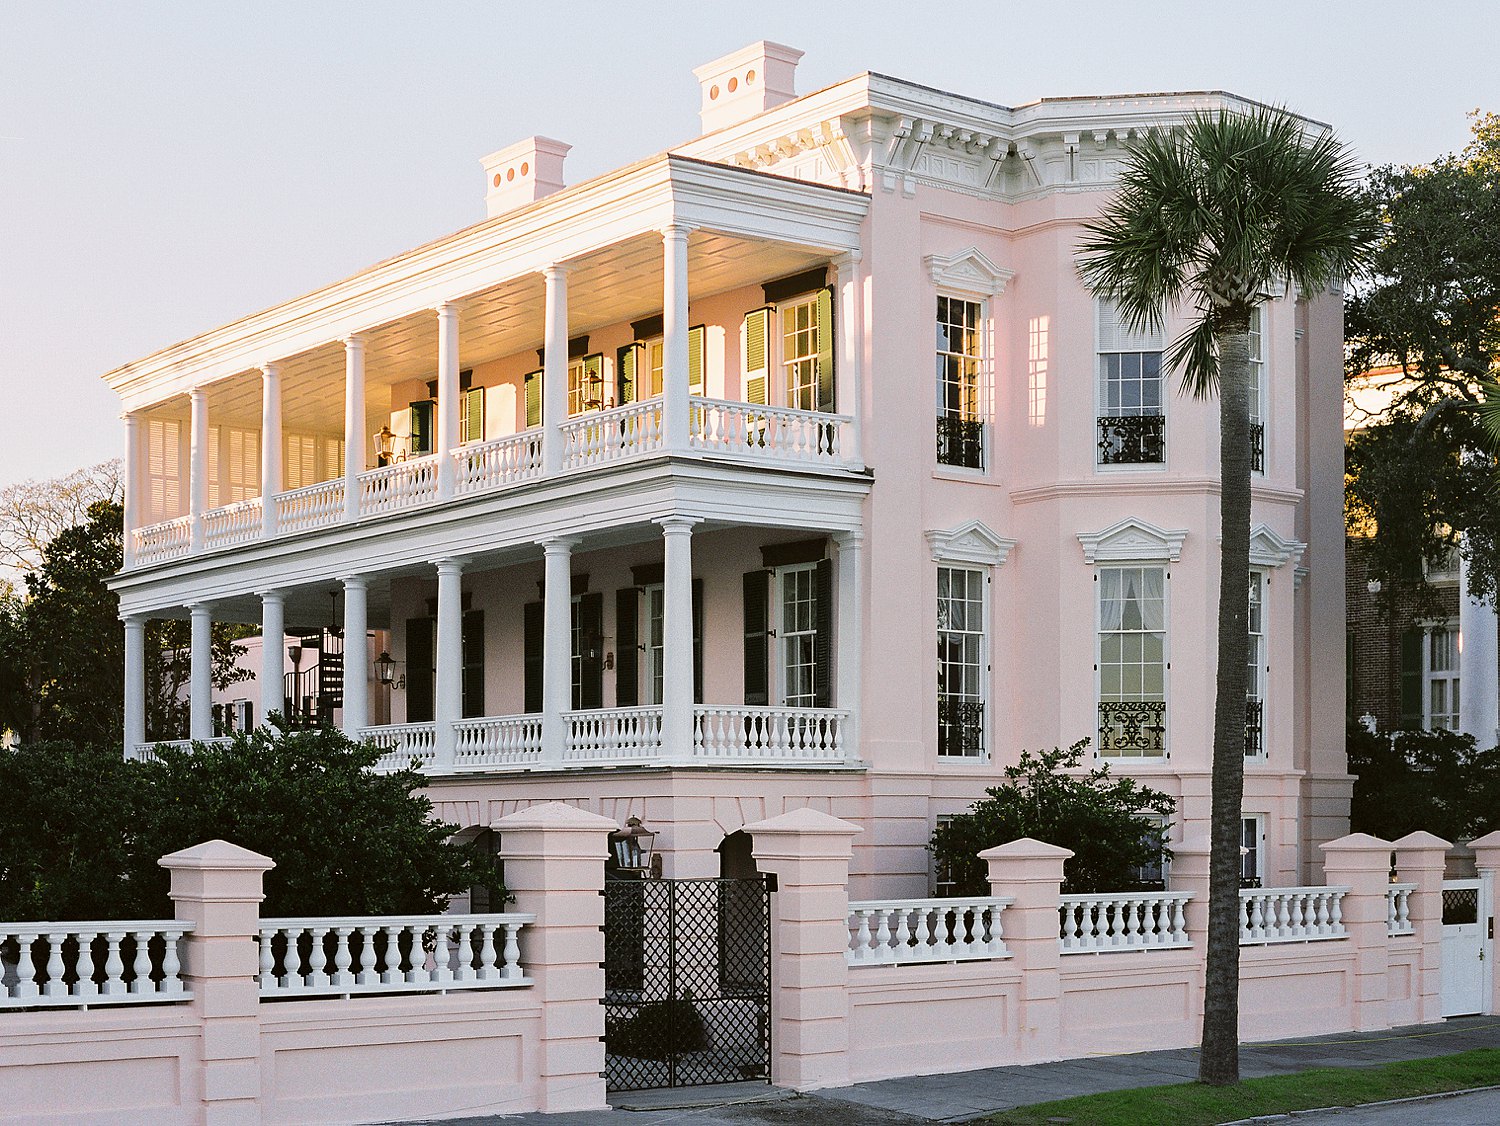 Pink three story mansion at sunset surrounded by palm trees in Charleston South Carolina